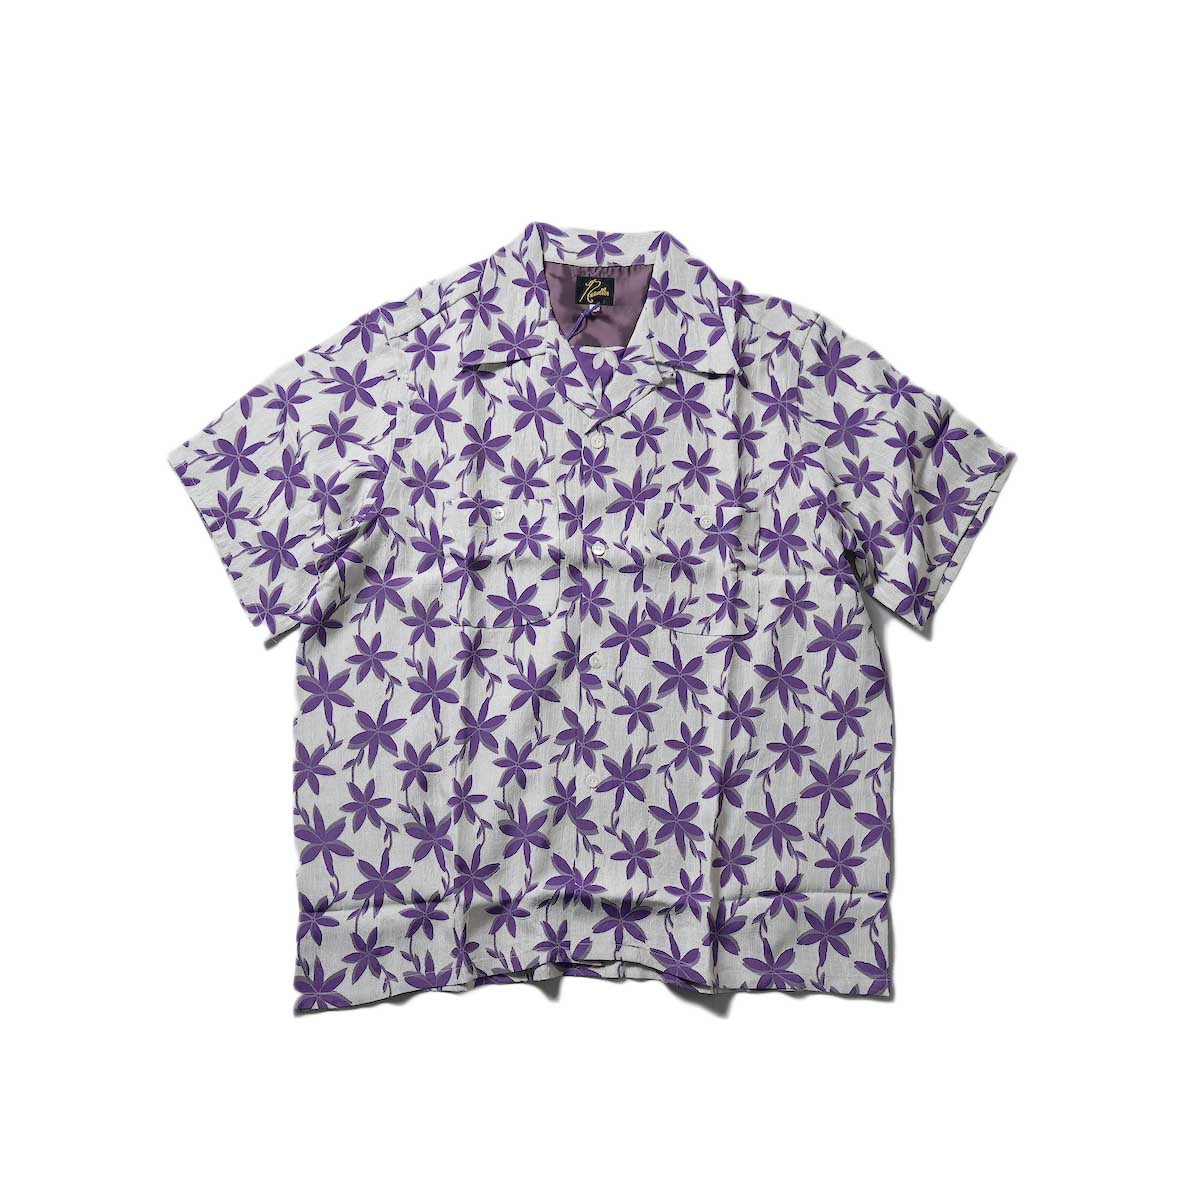 Needles / S/S One-Up Shirt - ACE/R Floral Jq (White)